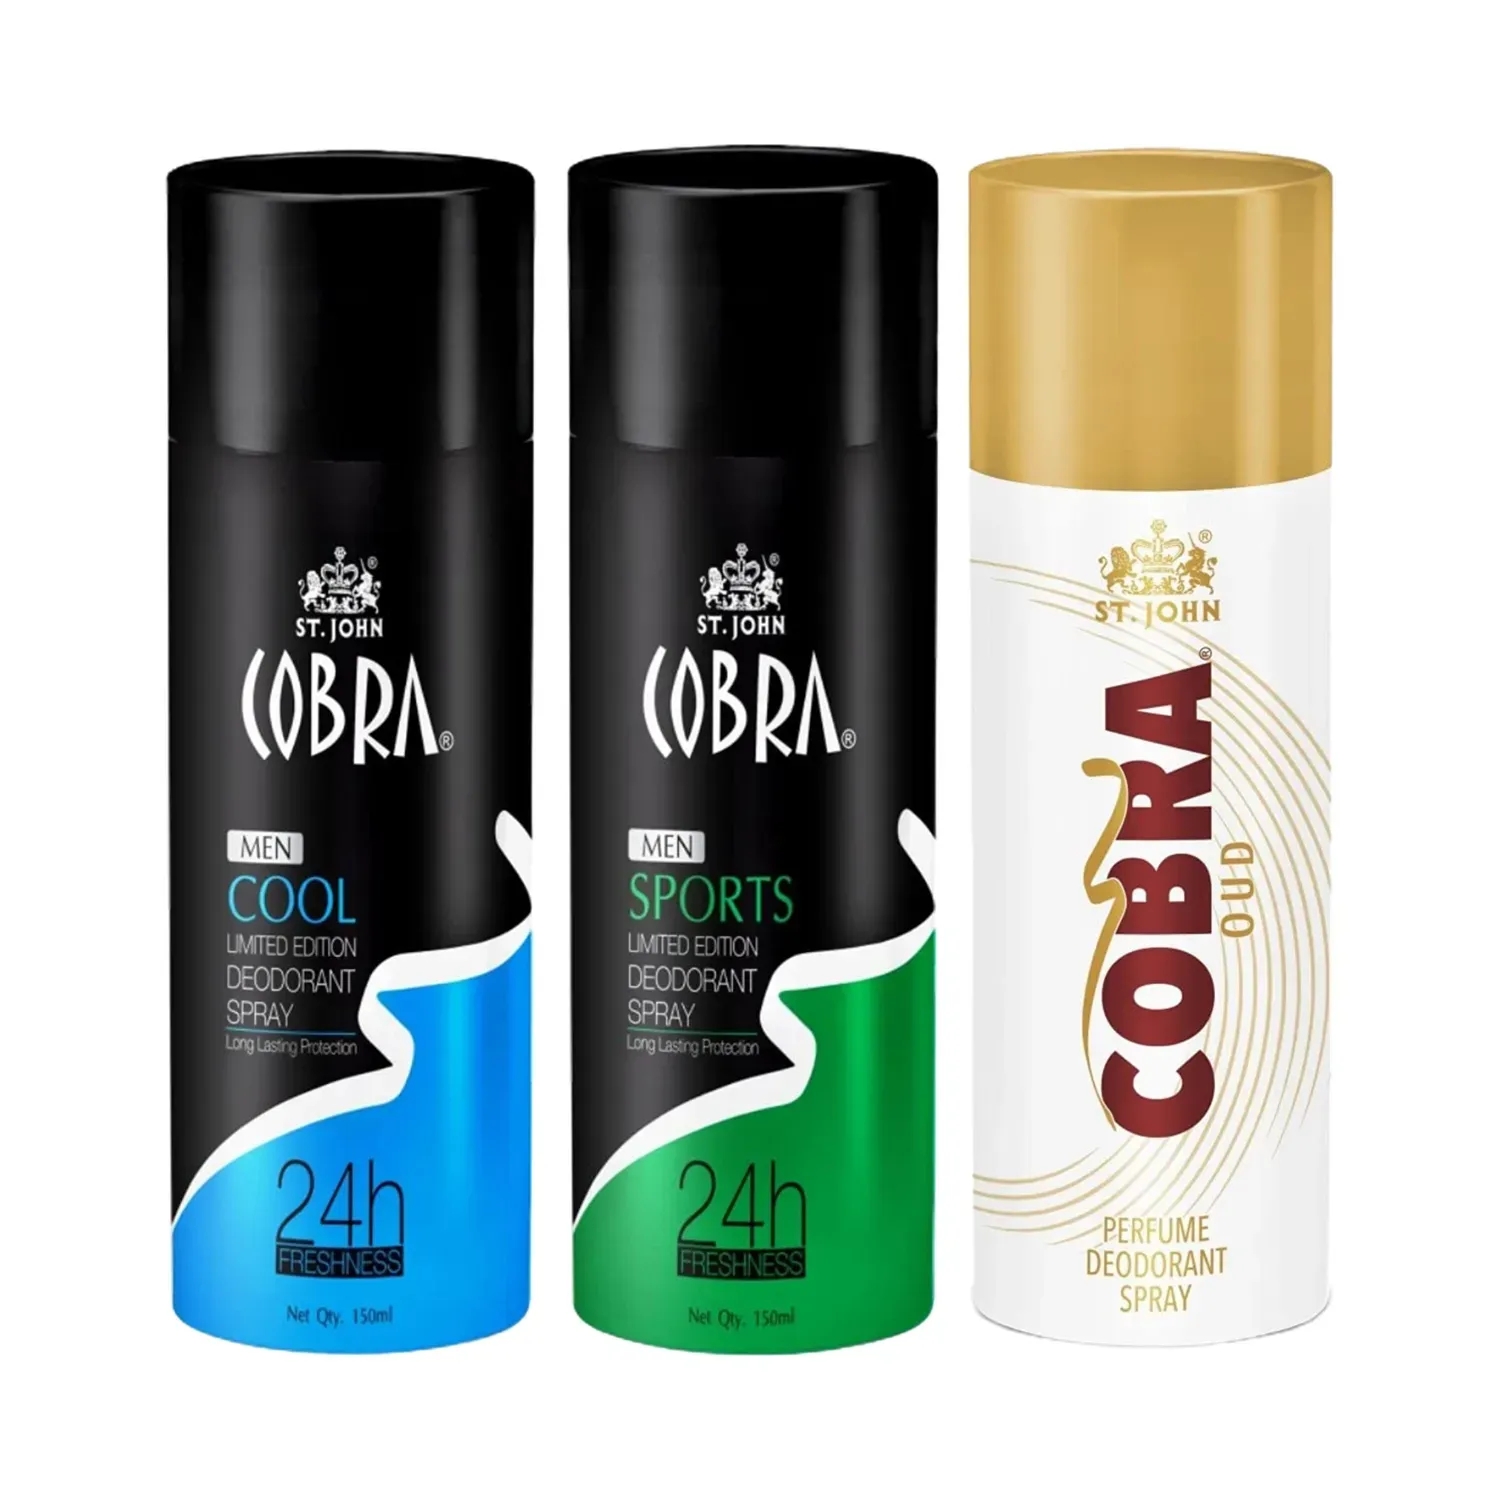 ST.JOHN Cobra Cool, Sports And Oud Limited Edition Deodorant Spray (3 Pcs)